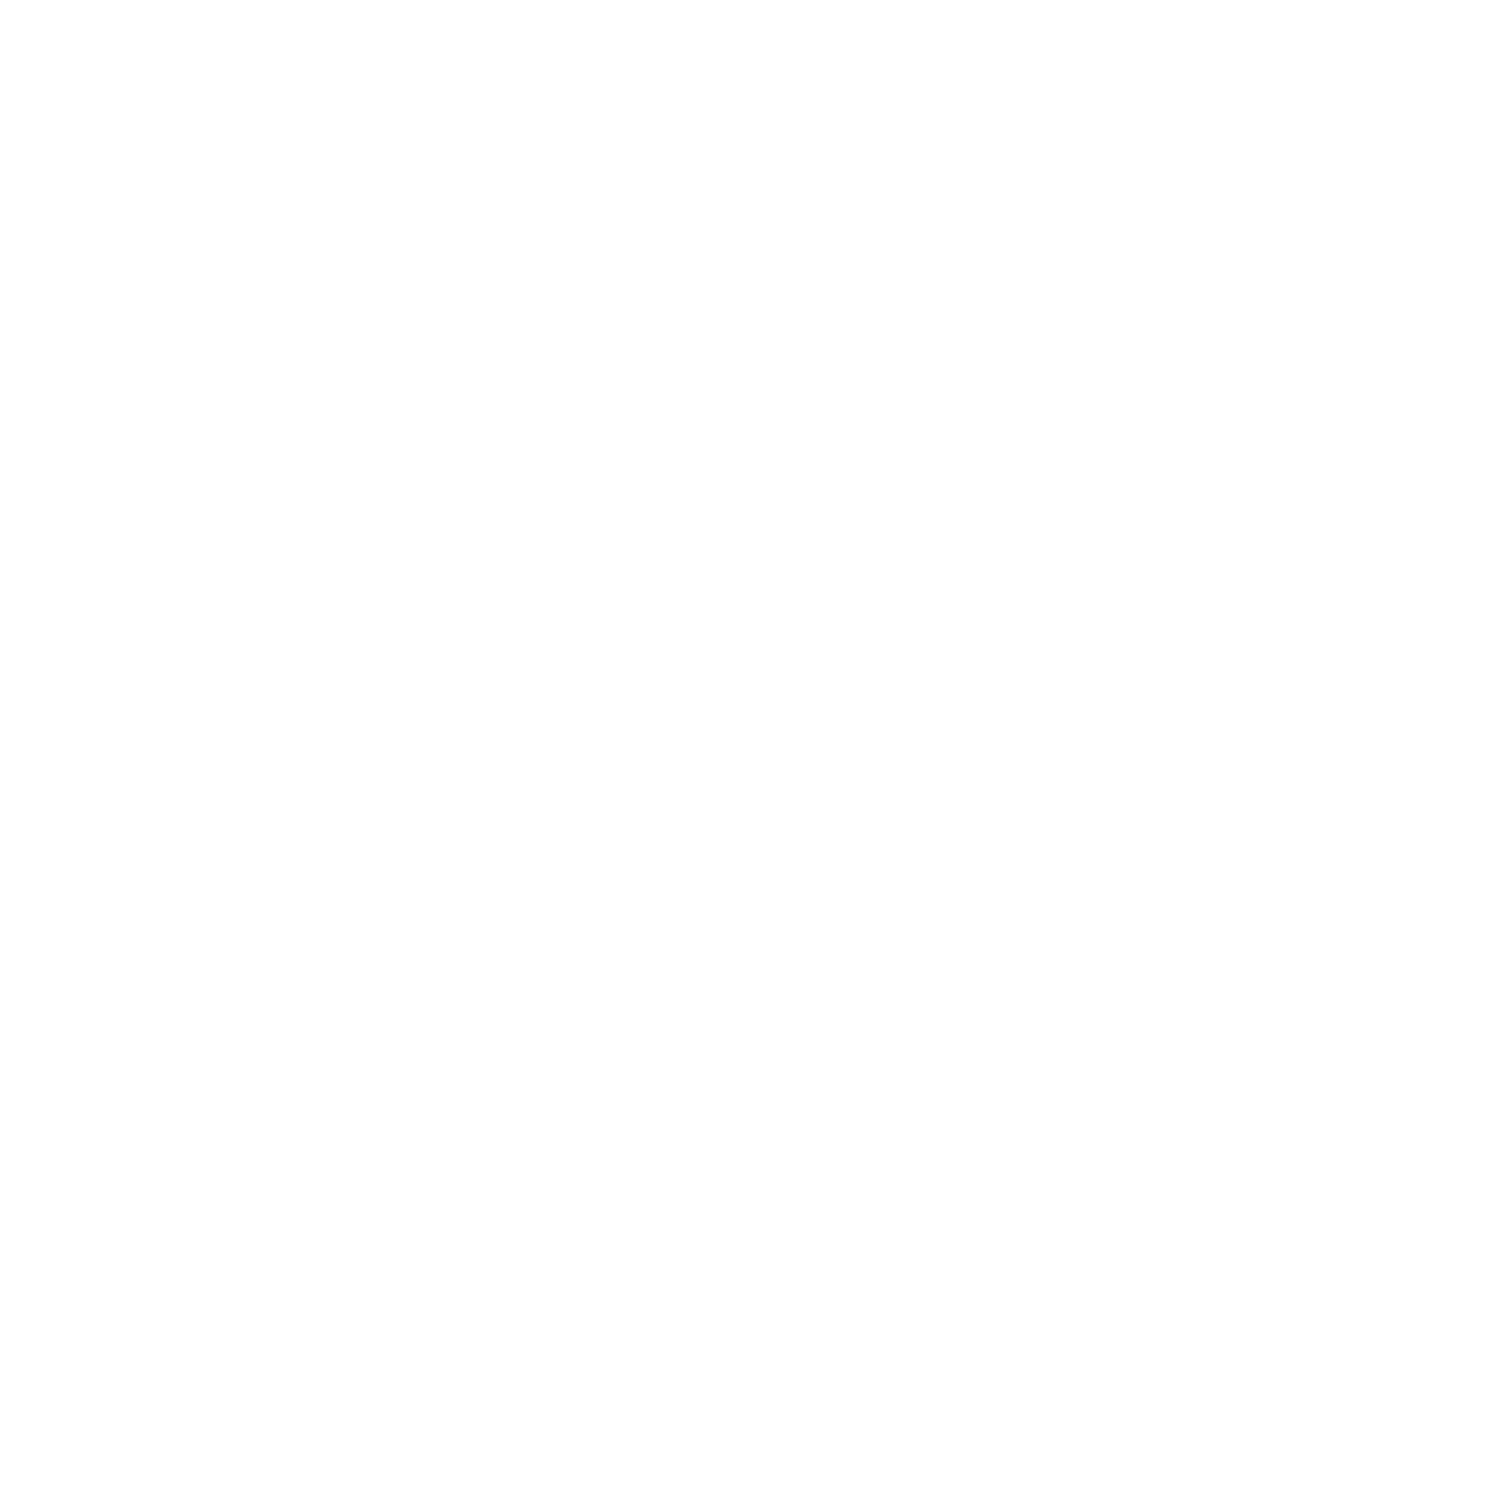 Ohio Valley Banc Corp logo for dark backgrounds (transparent PNG)